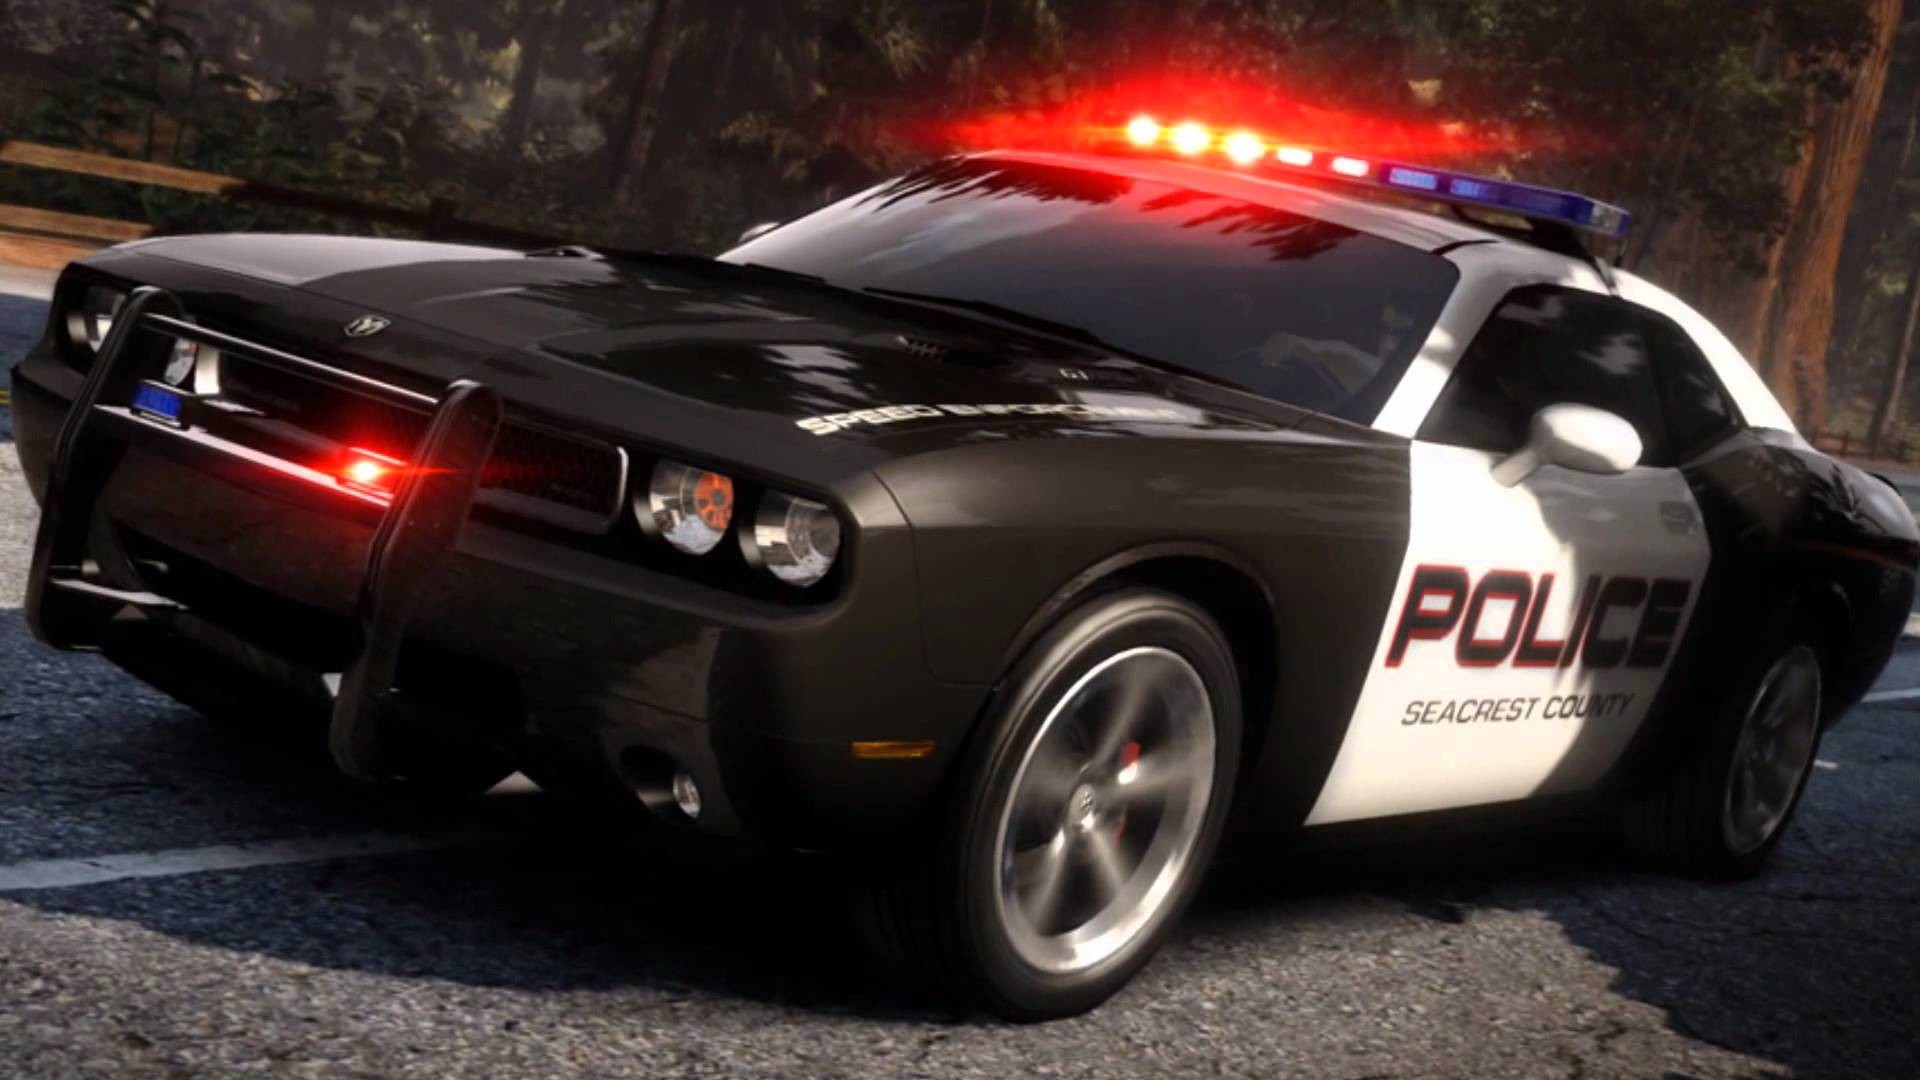 1920x1080 Need for Speed- Hot Pursuit cool police cars and theme song!